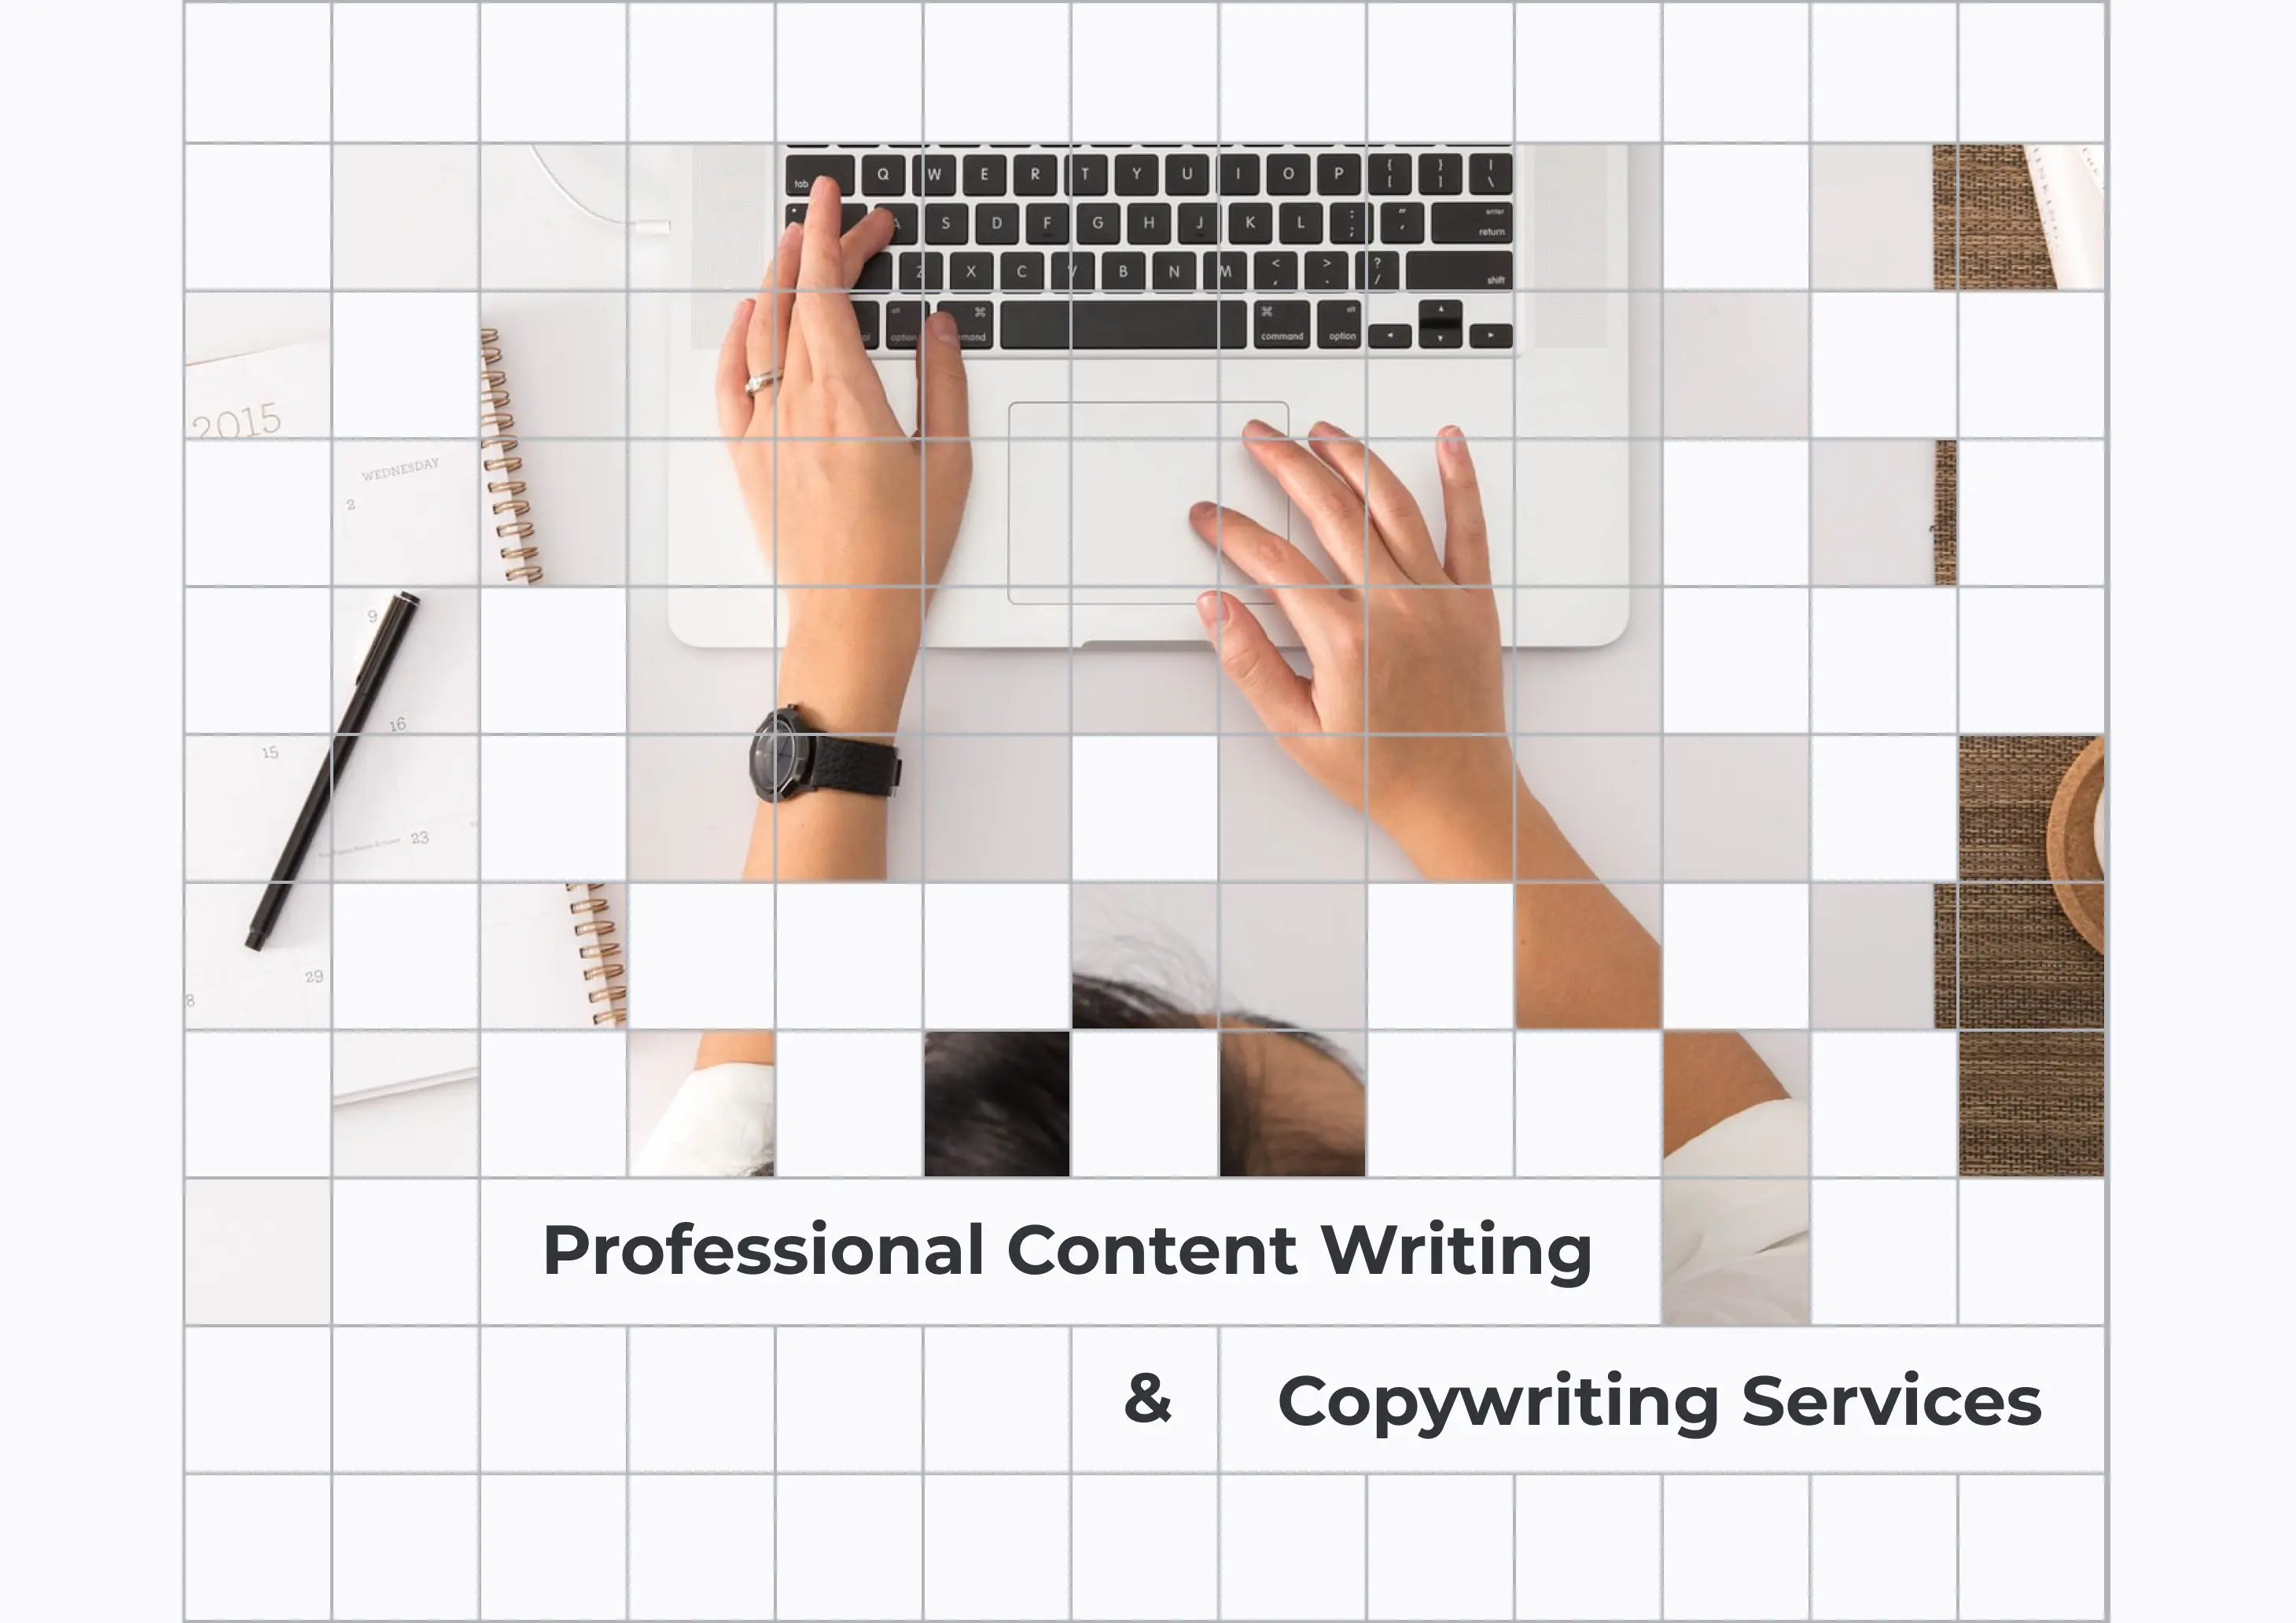 Professional Content Writing & Copywriting Services